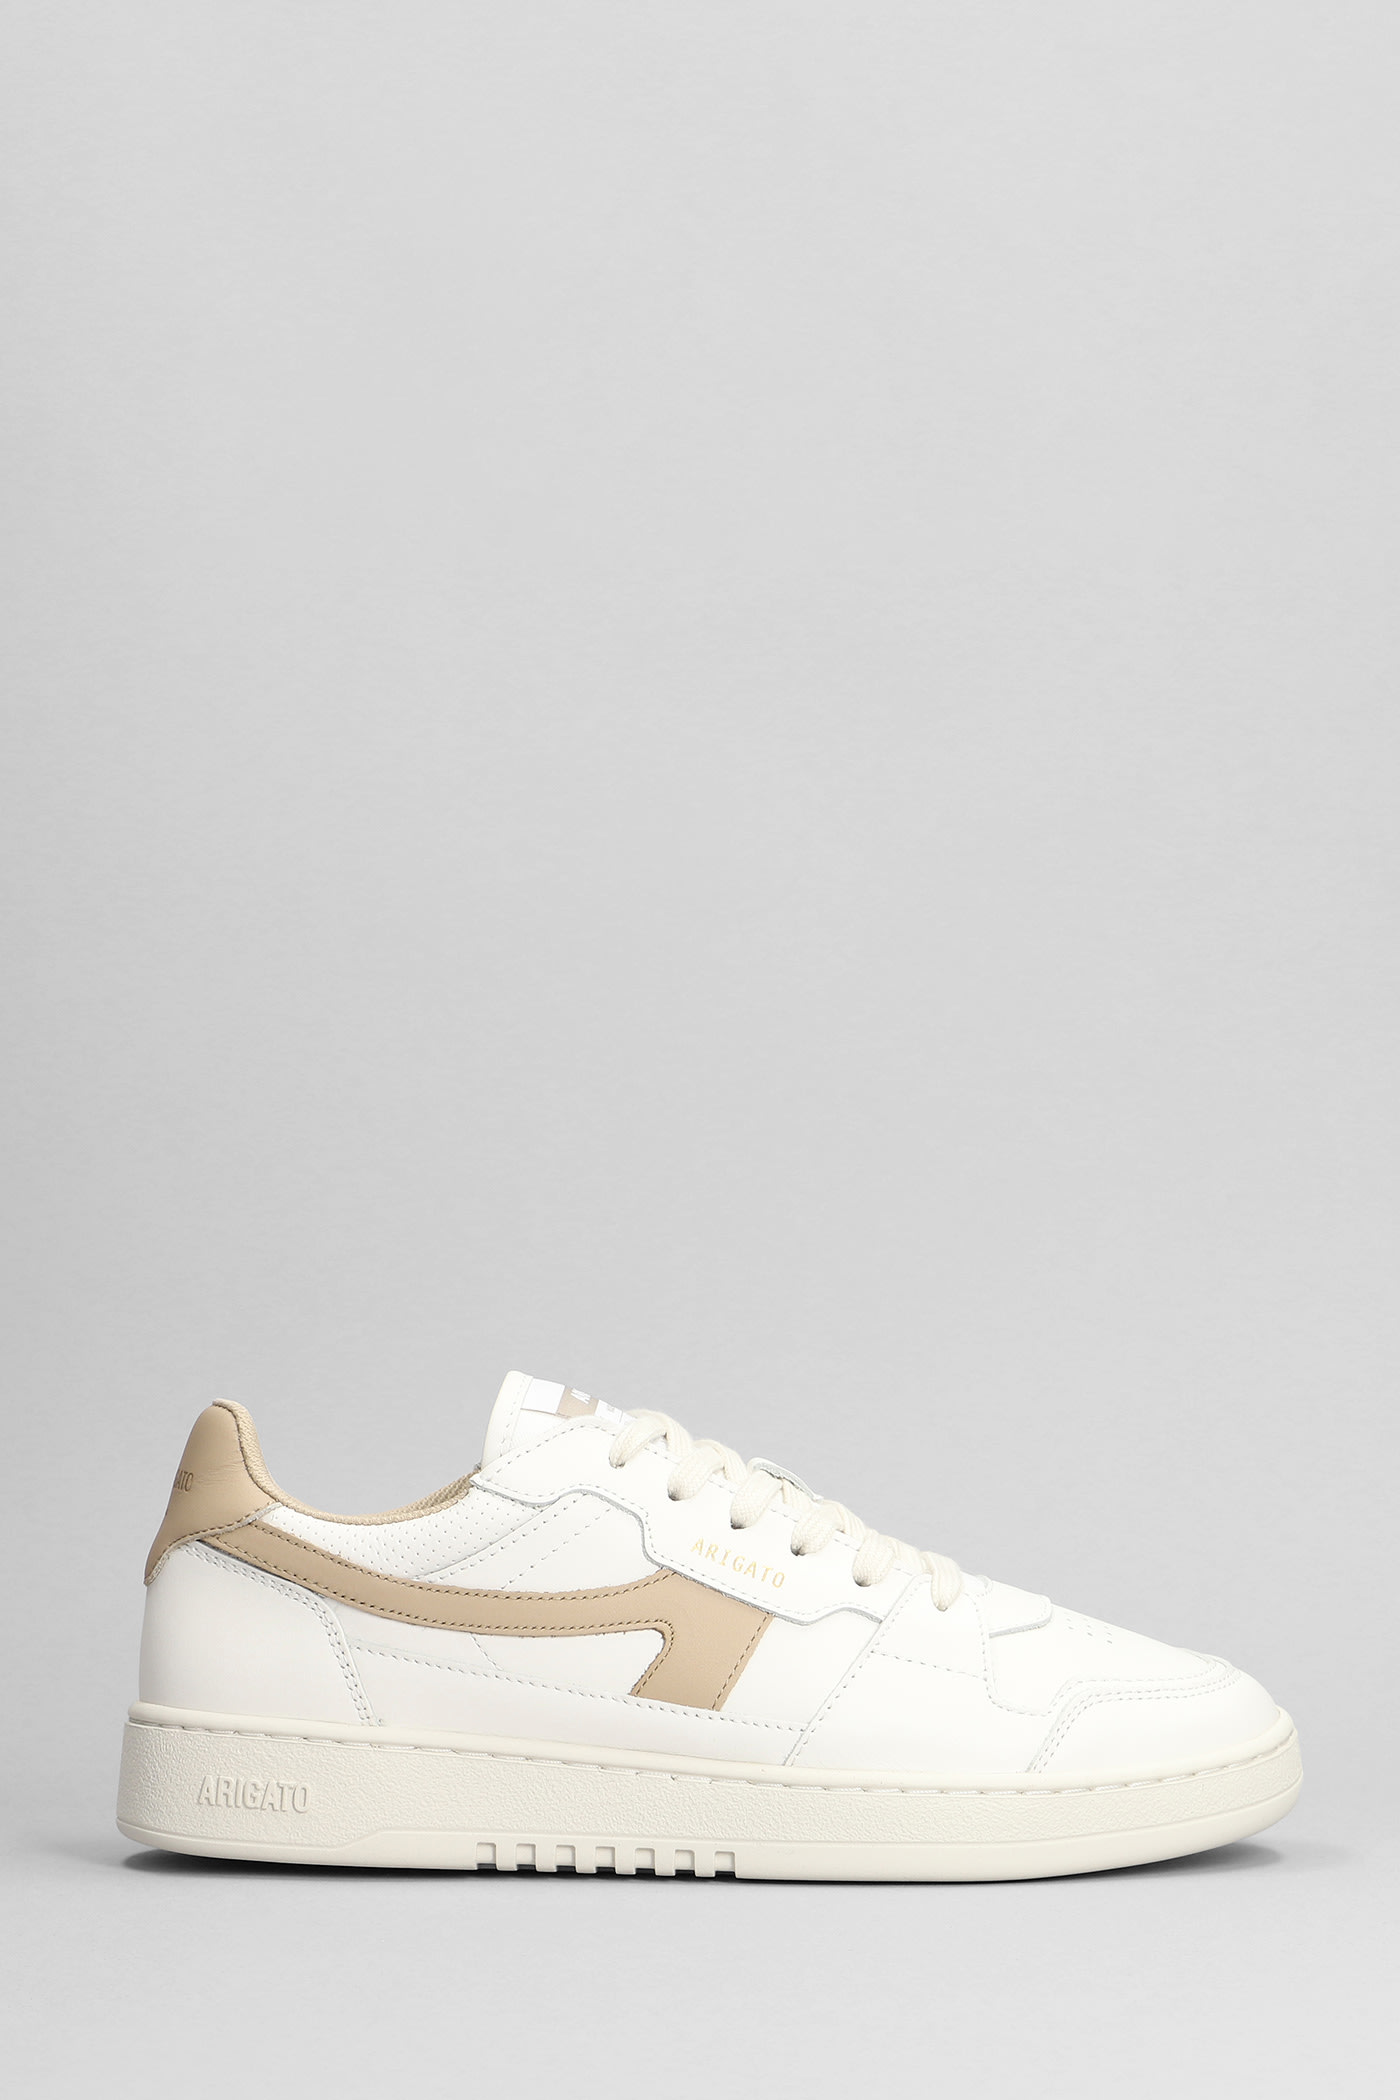 AXEL ARIGATO DICE-A SNEAKER SNEAKERS IN WHITE LEATHER